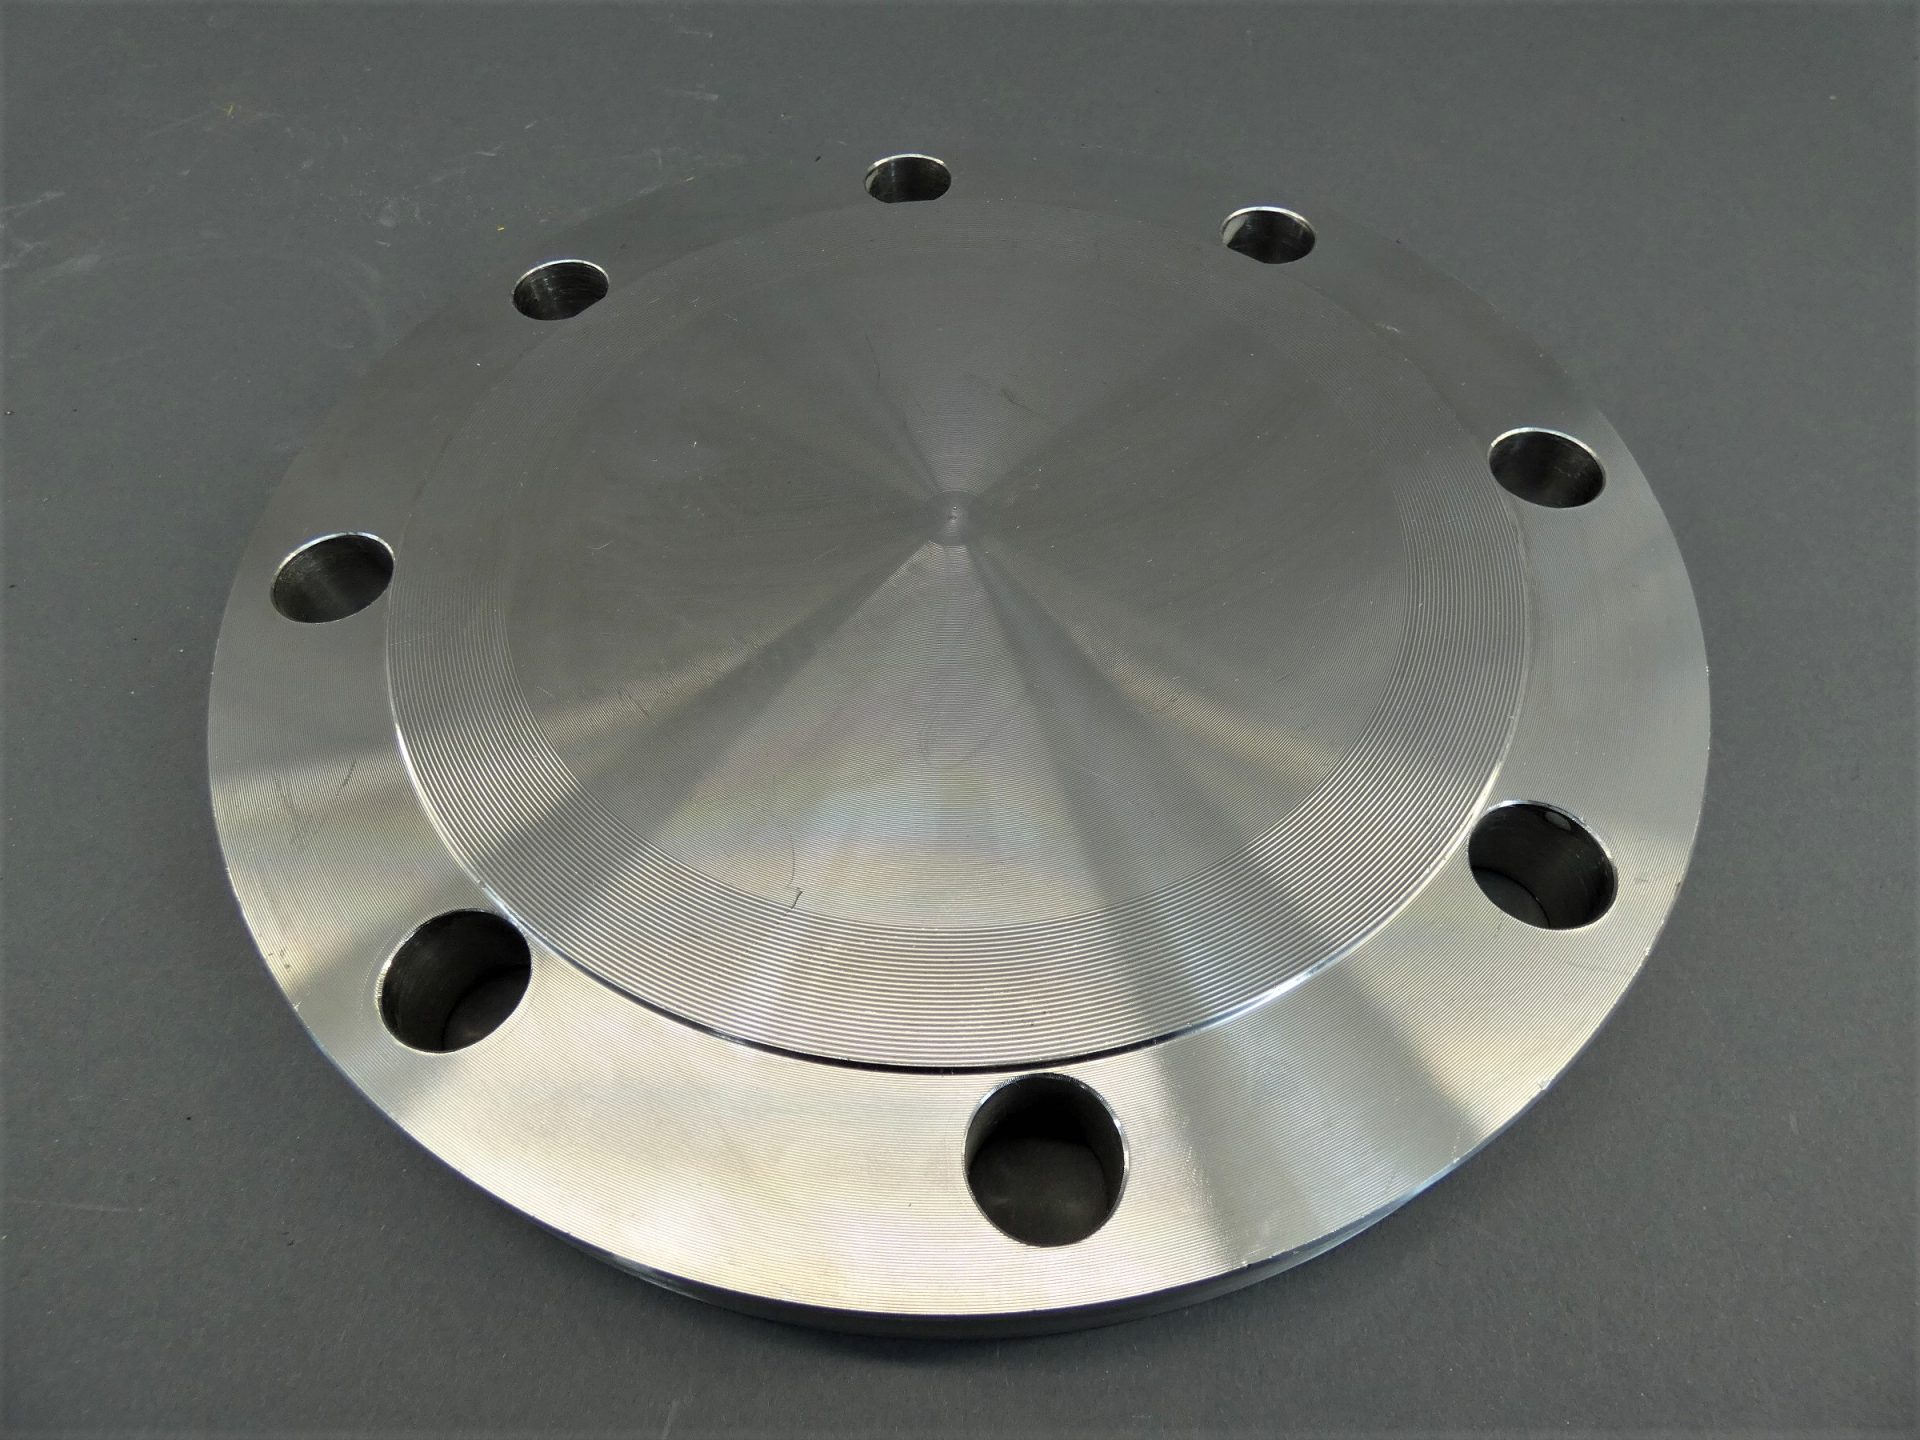 6″ Ansi Blind Flange B165 A182 Raised Face Rf Stainless Steel 150 316316l Ss Gpm Surplus 1813